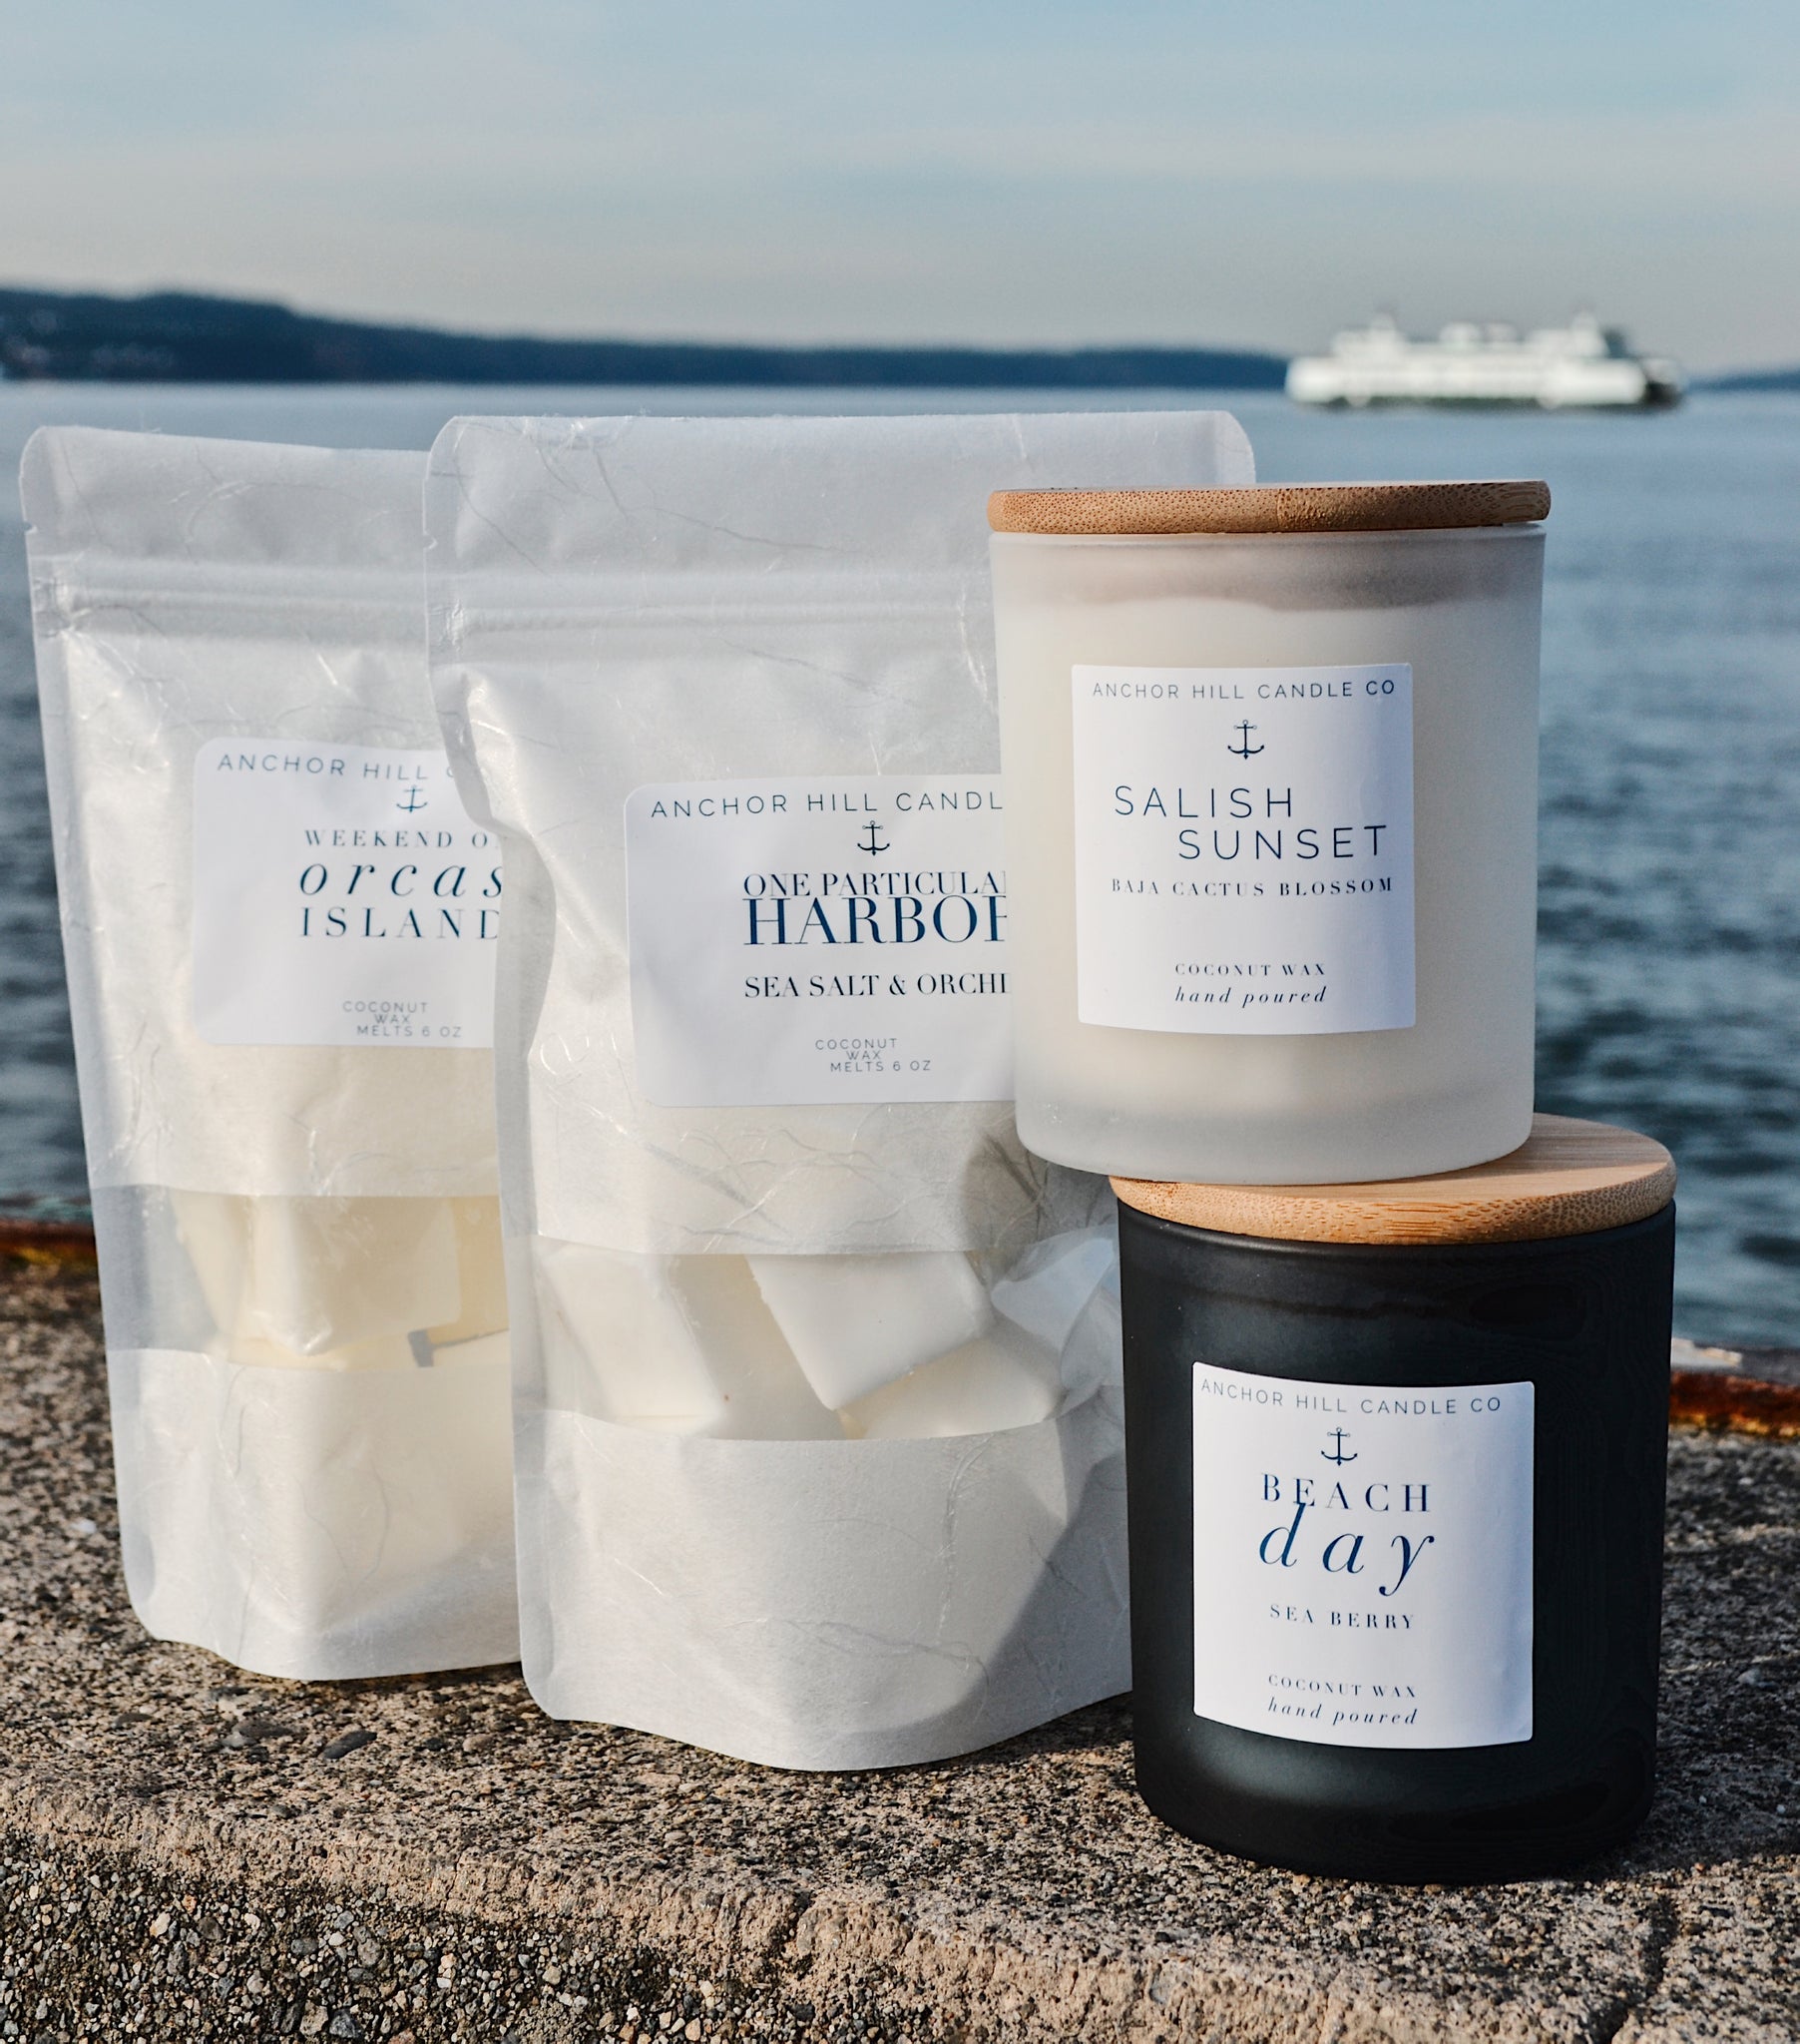 Wax Melts One Particular Harbor – Anchor Hill Candle Co